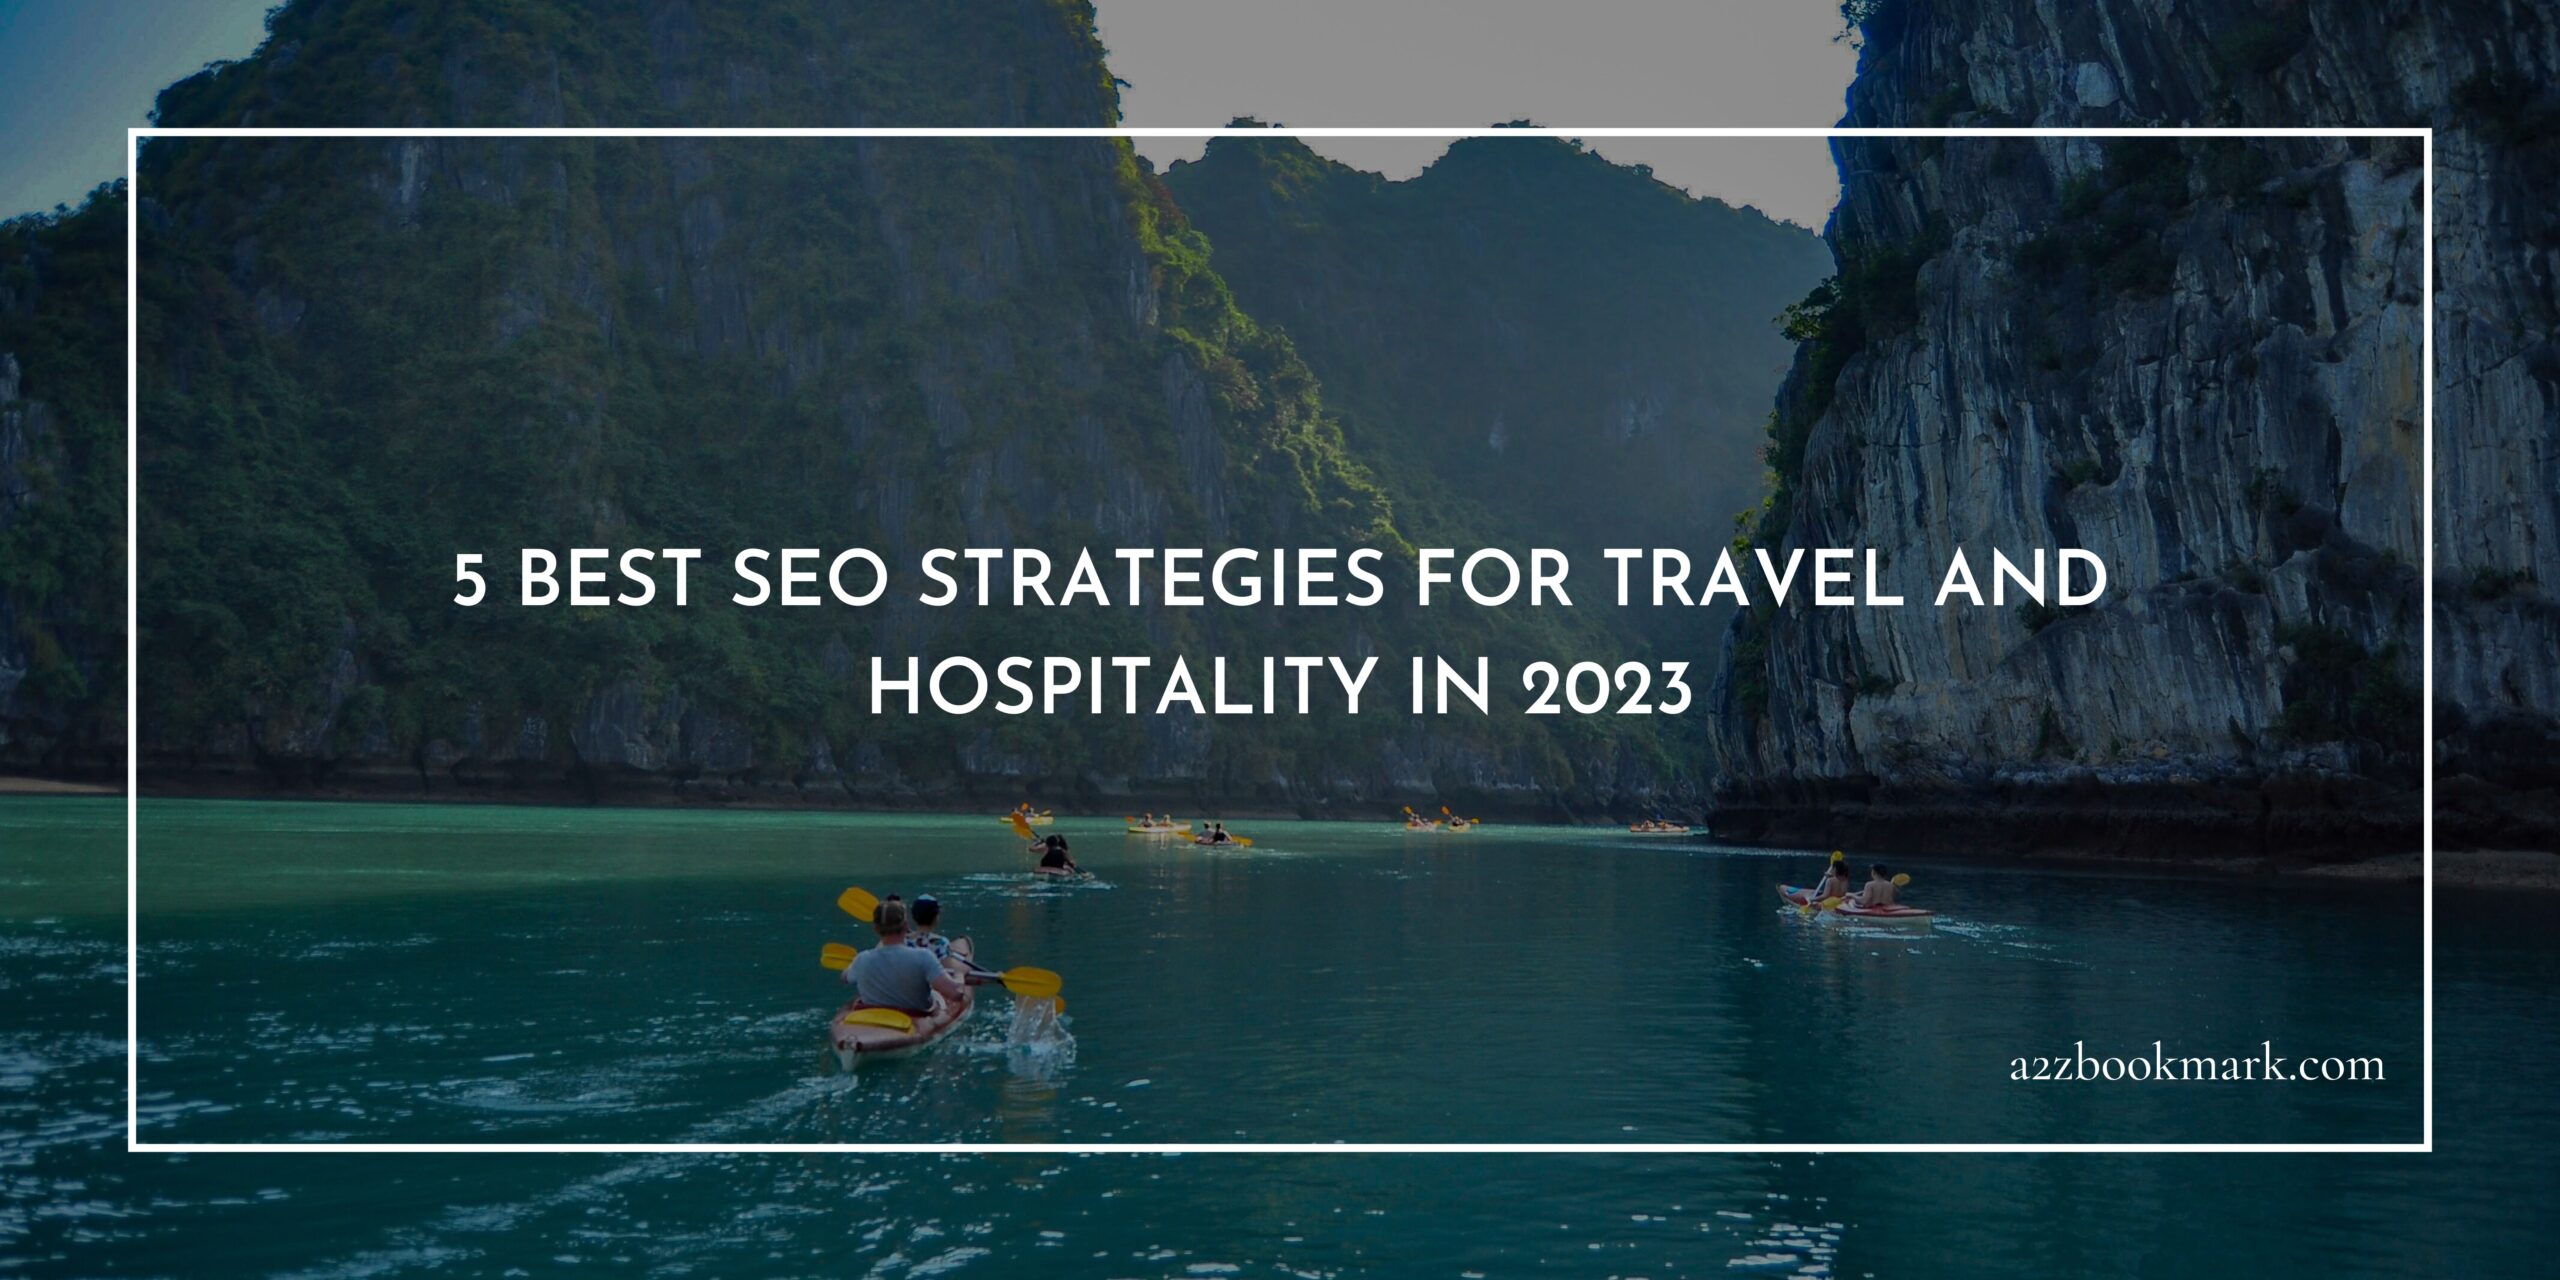 Best SEO Strategies for Travel and Hospitality in 2023